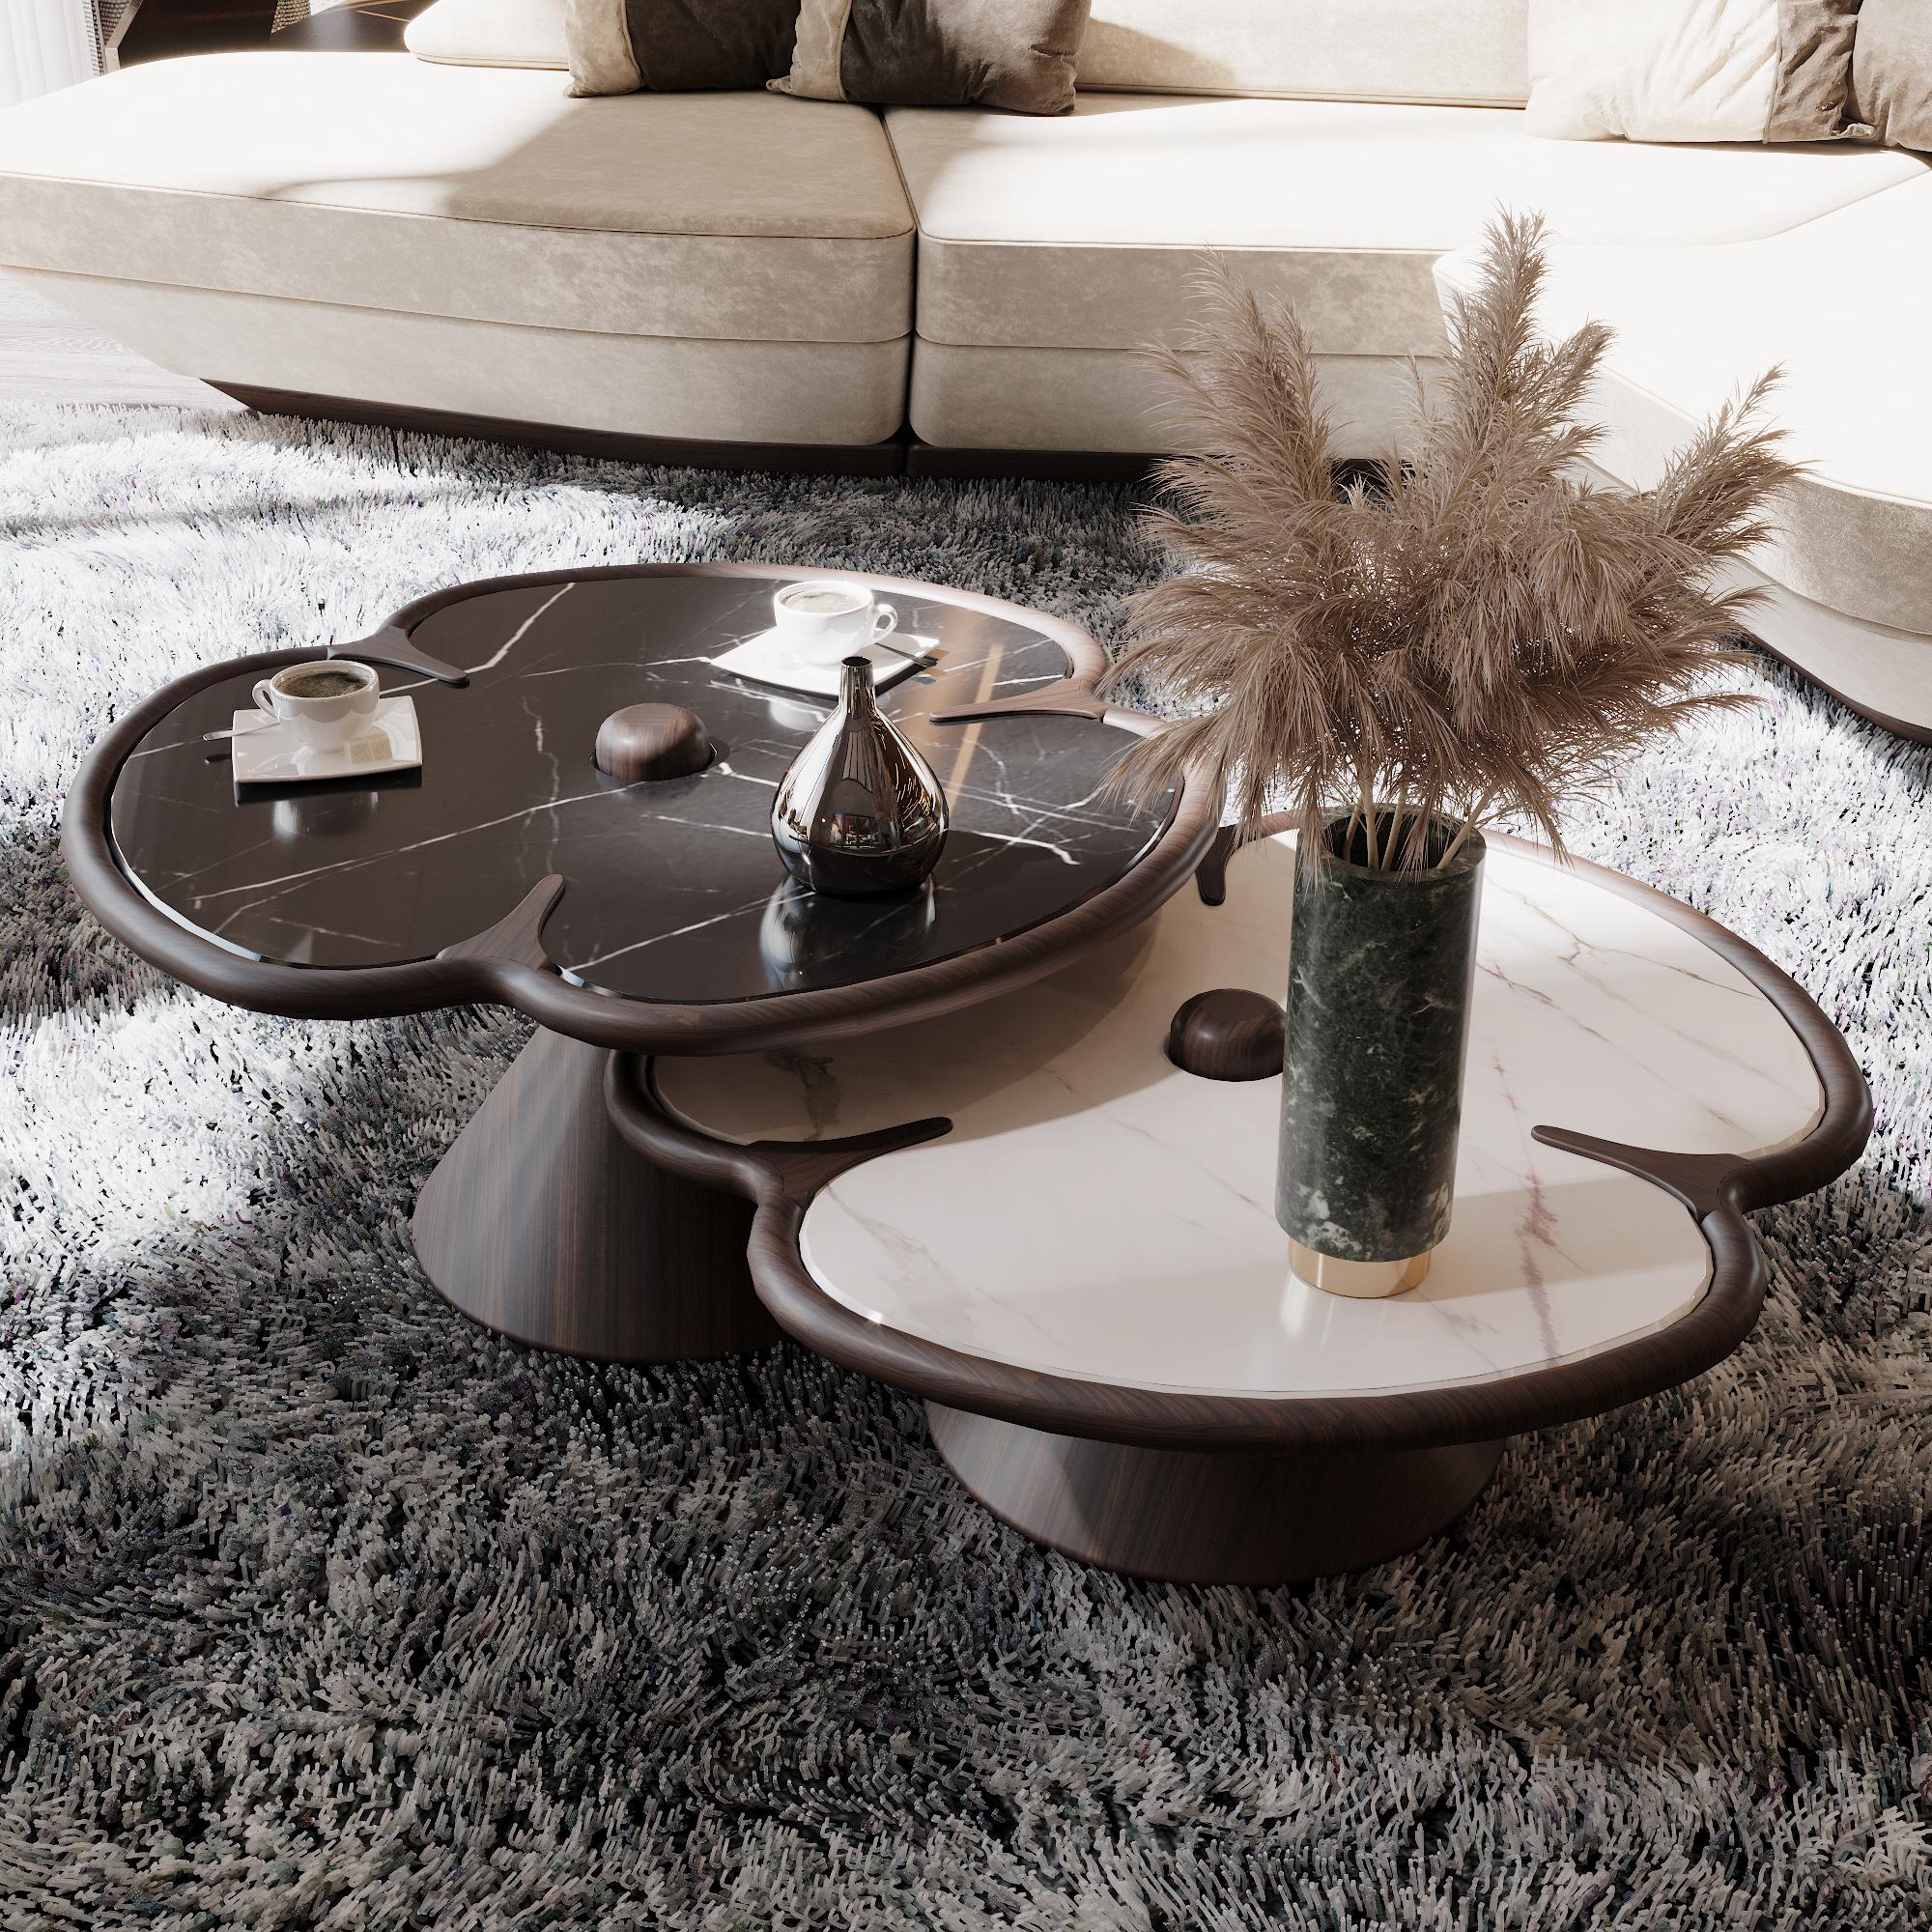 A true statement of luxury
Combining the finest and ancient craftsmanship with luxurious levels of design, quality, and comfort. 

Tallaght coffee table, Modern Collection, Solid Walnut Wood, Travertino Marble polished - Traditional Handcrafted